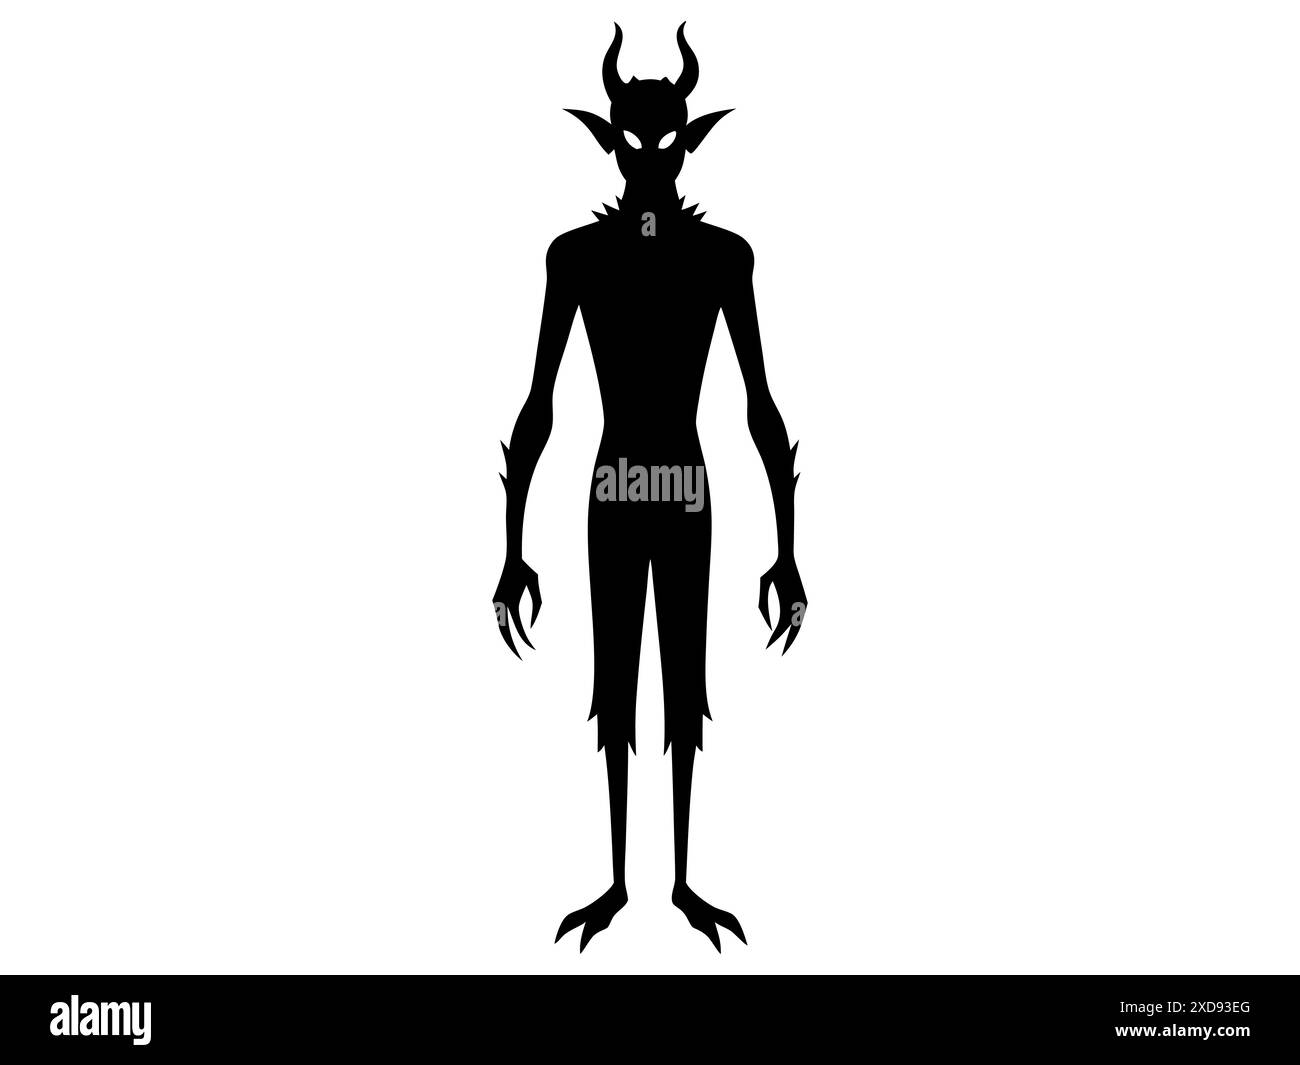 Black silhouette of devil character isolated on a white background. Concept of Halloween, fantasy creature, mythical demon, villainous imp, digital ar Stock Vector